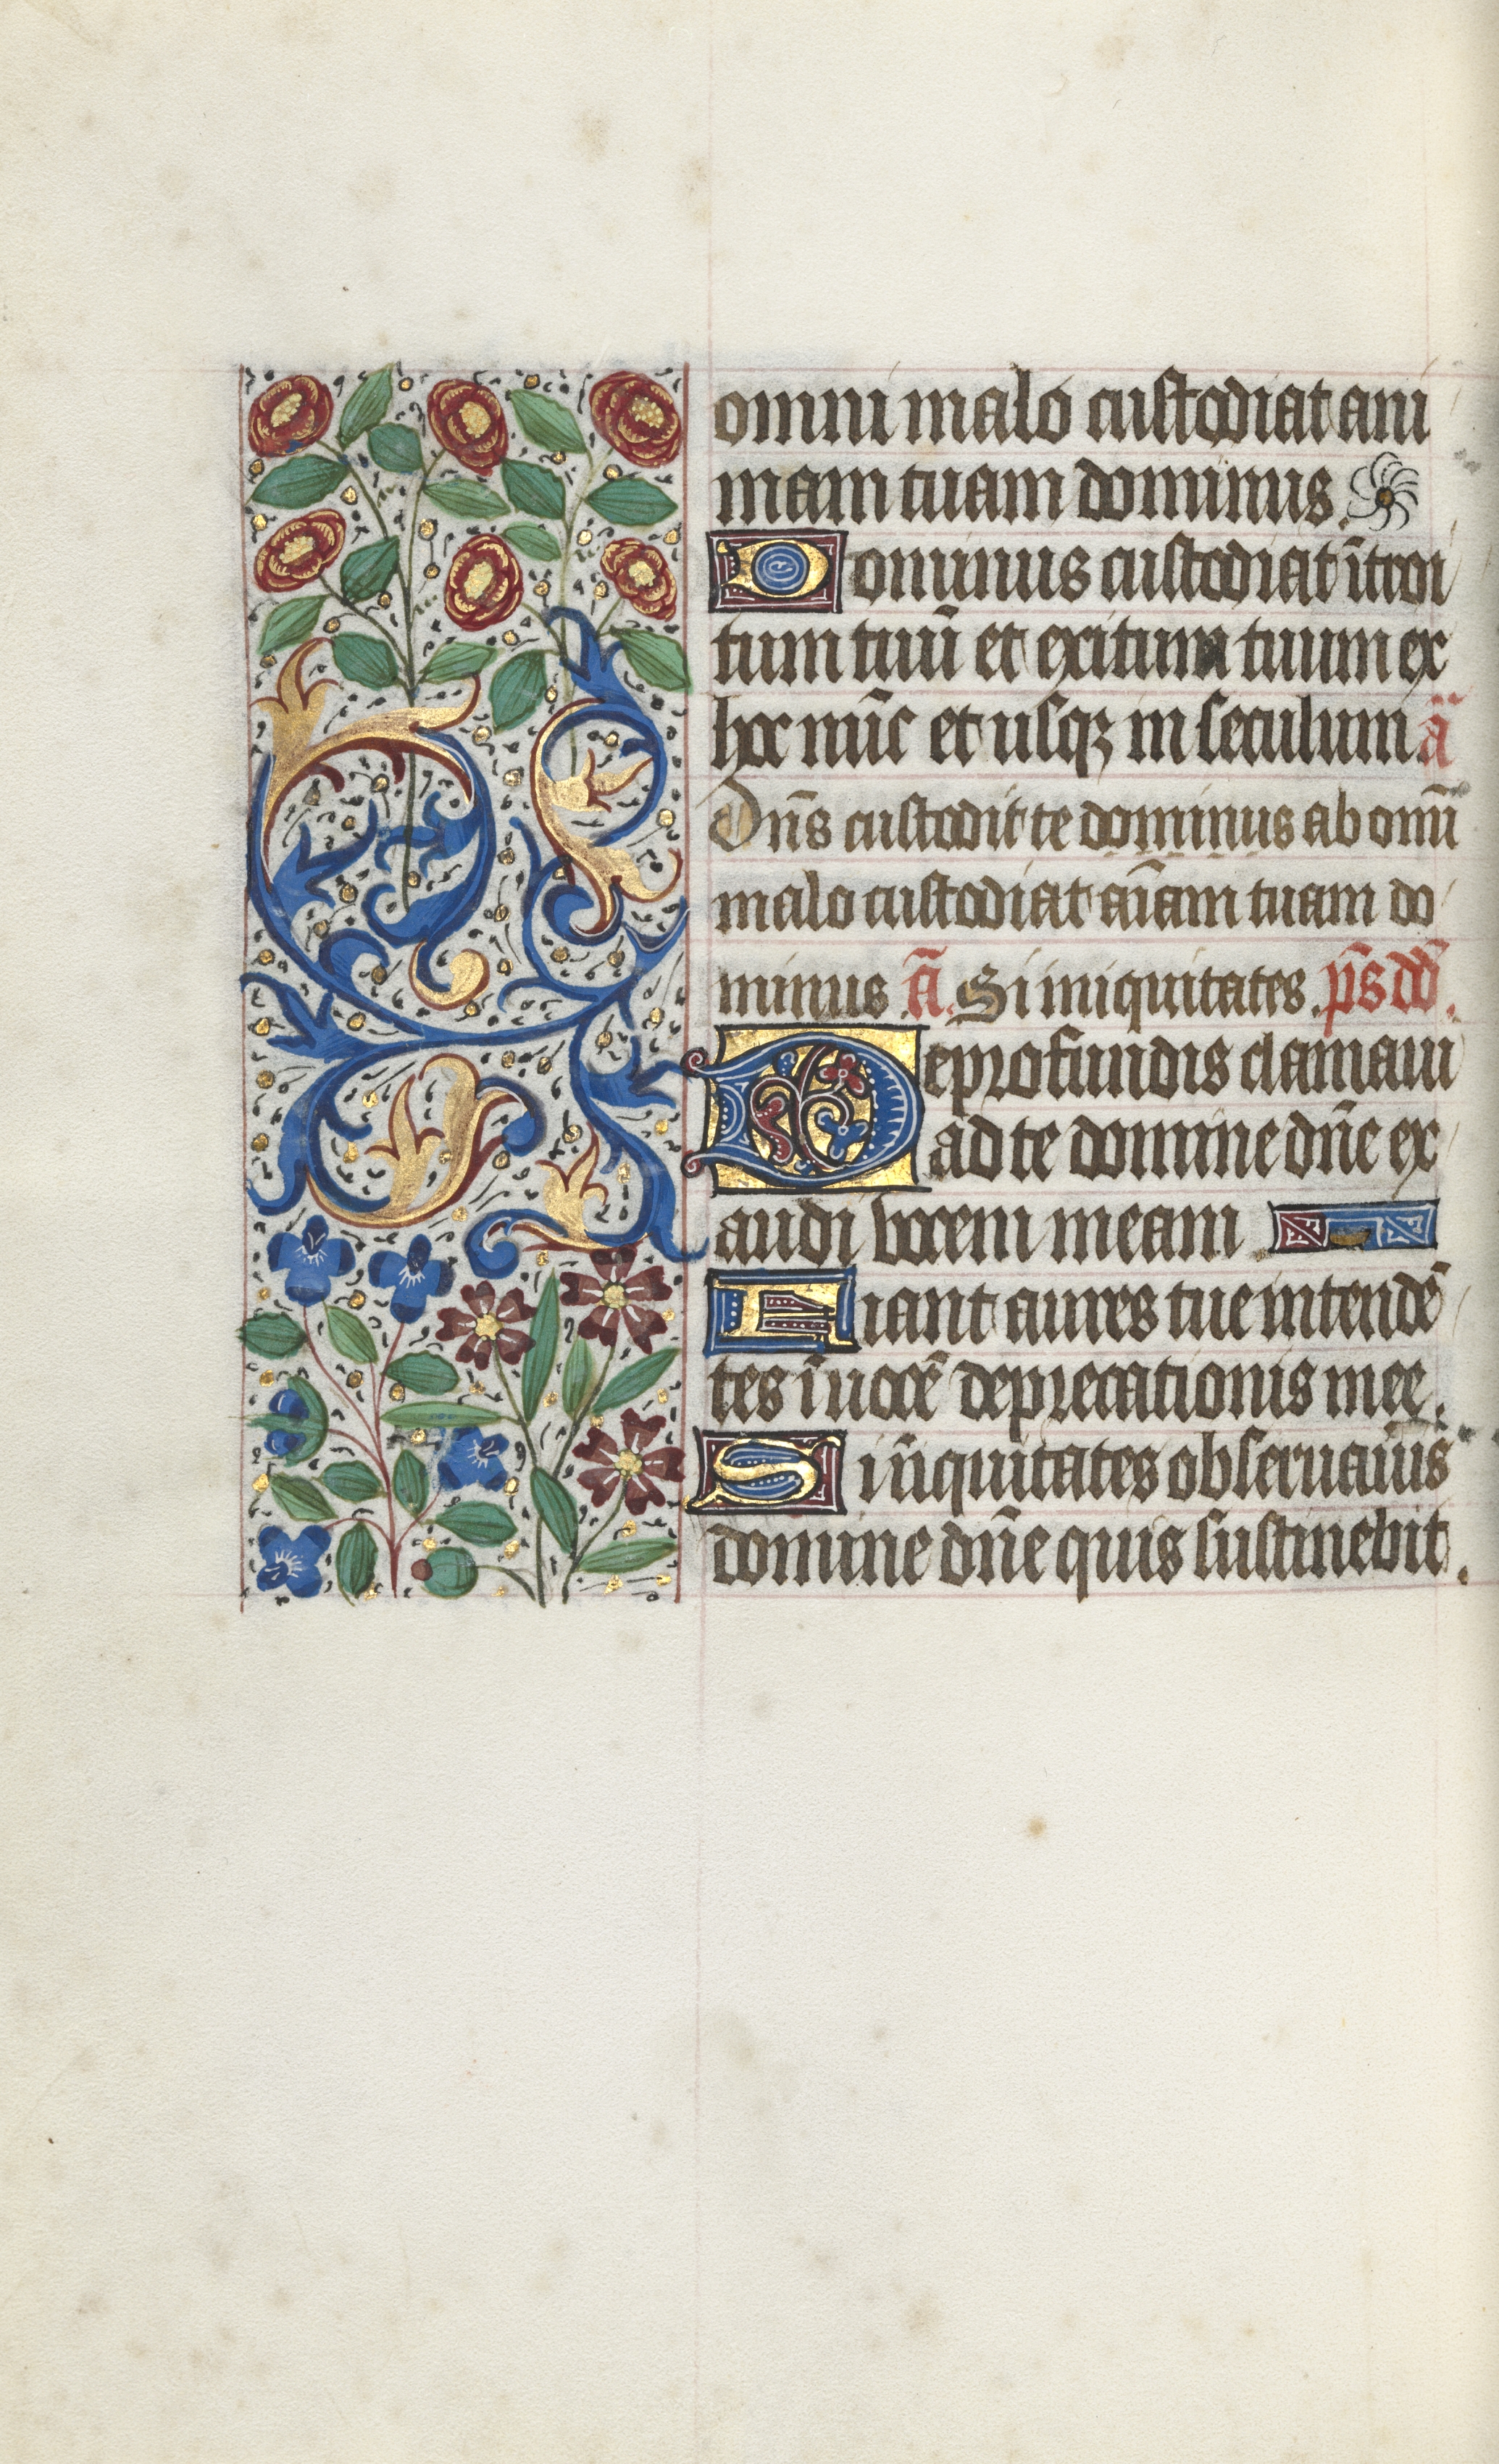 Book of Hours (Use of Rouen): fol. 105v